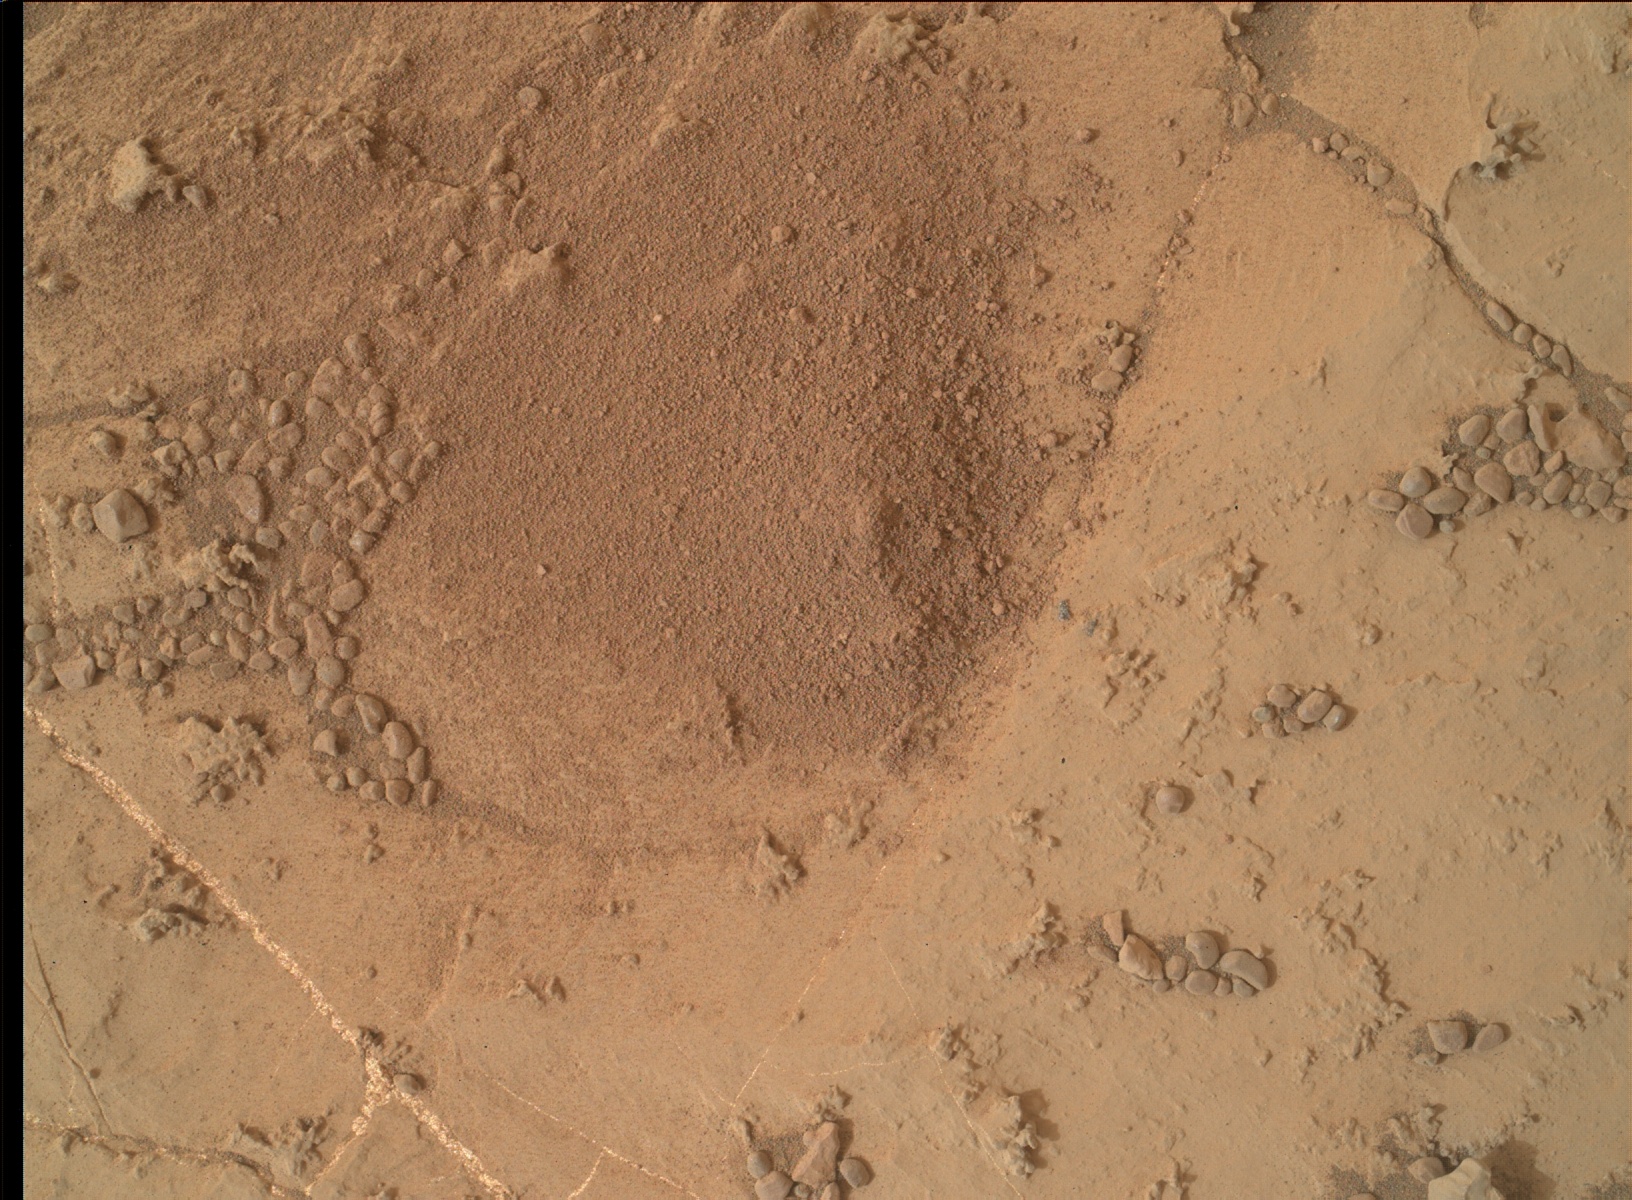 Nasa's Mars rover Curiosity acquired this image using its Mars Hand Lens Imager (MAHLI) on Sol 2154